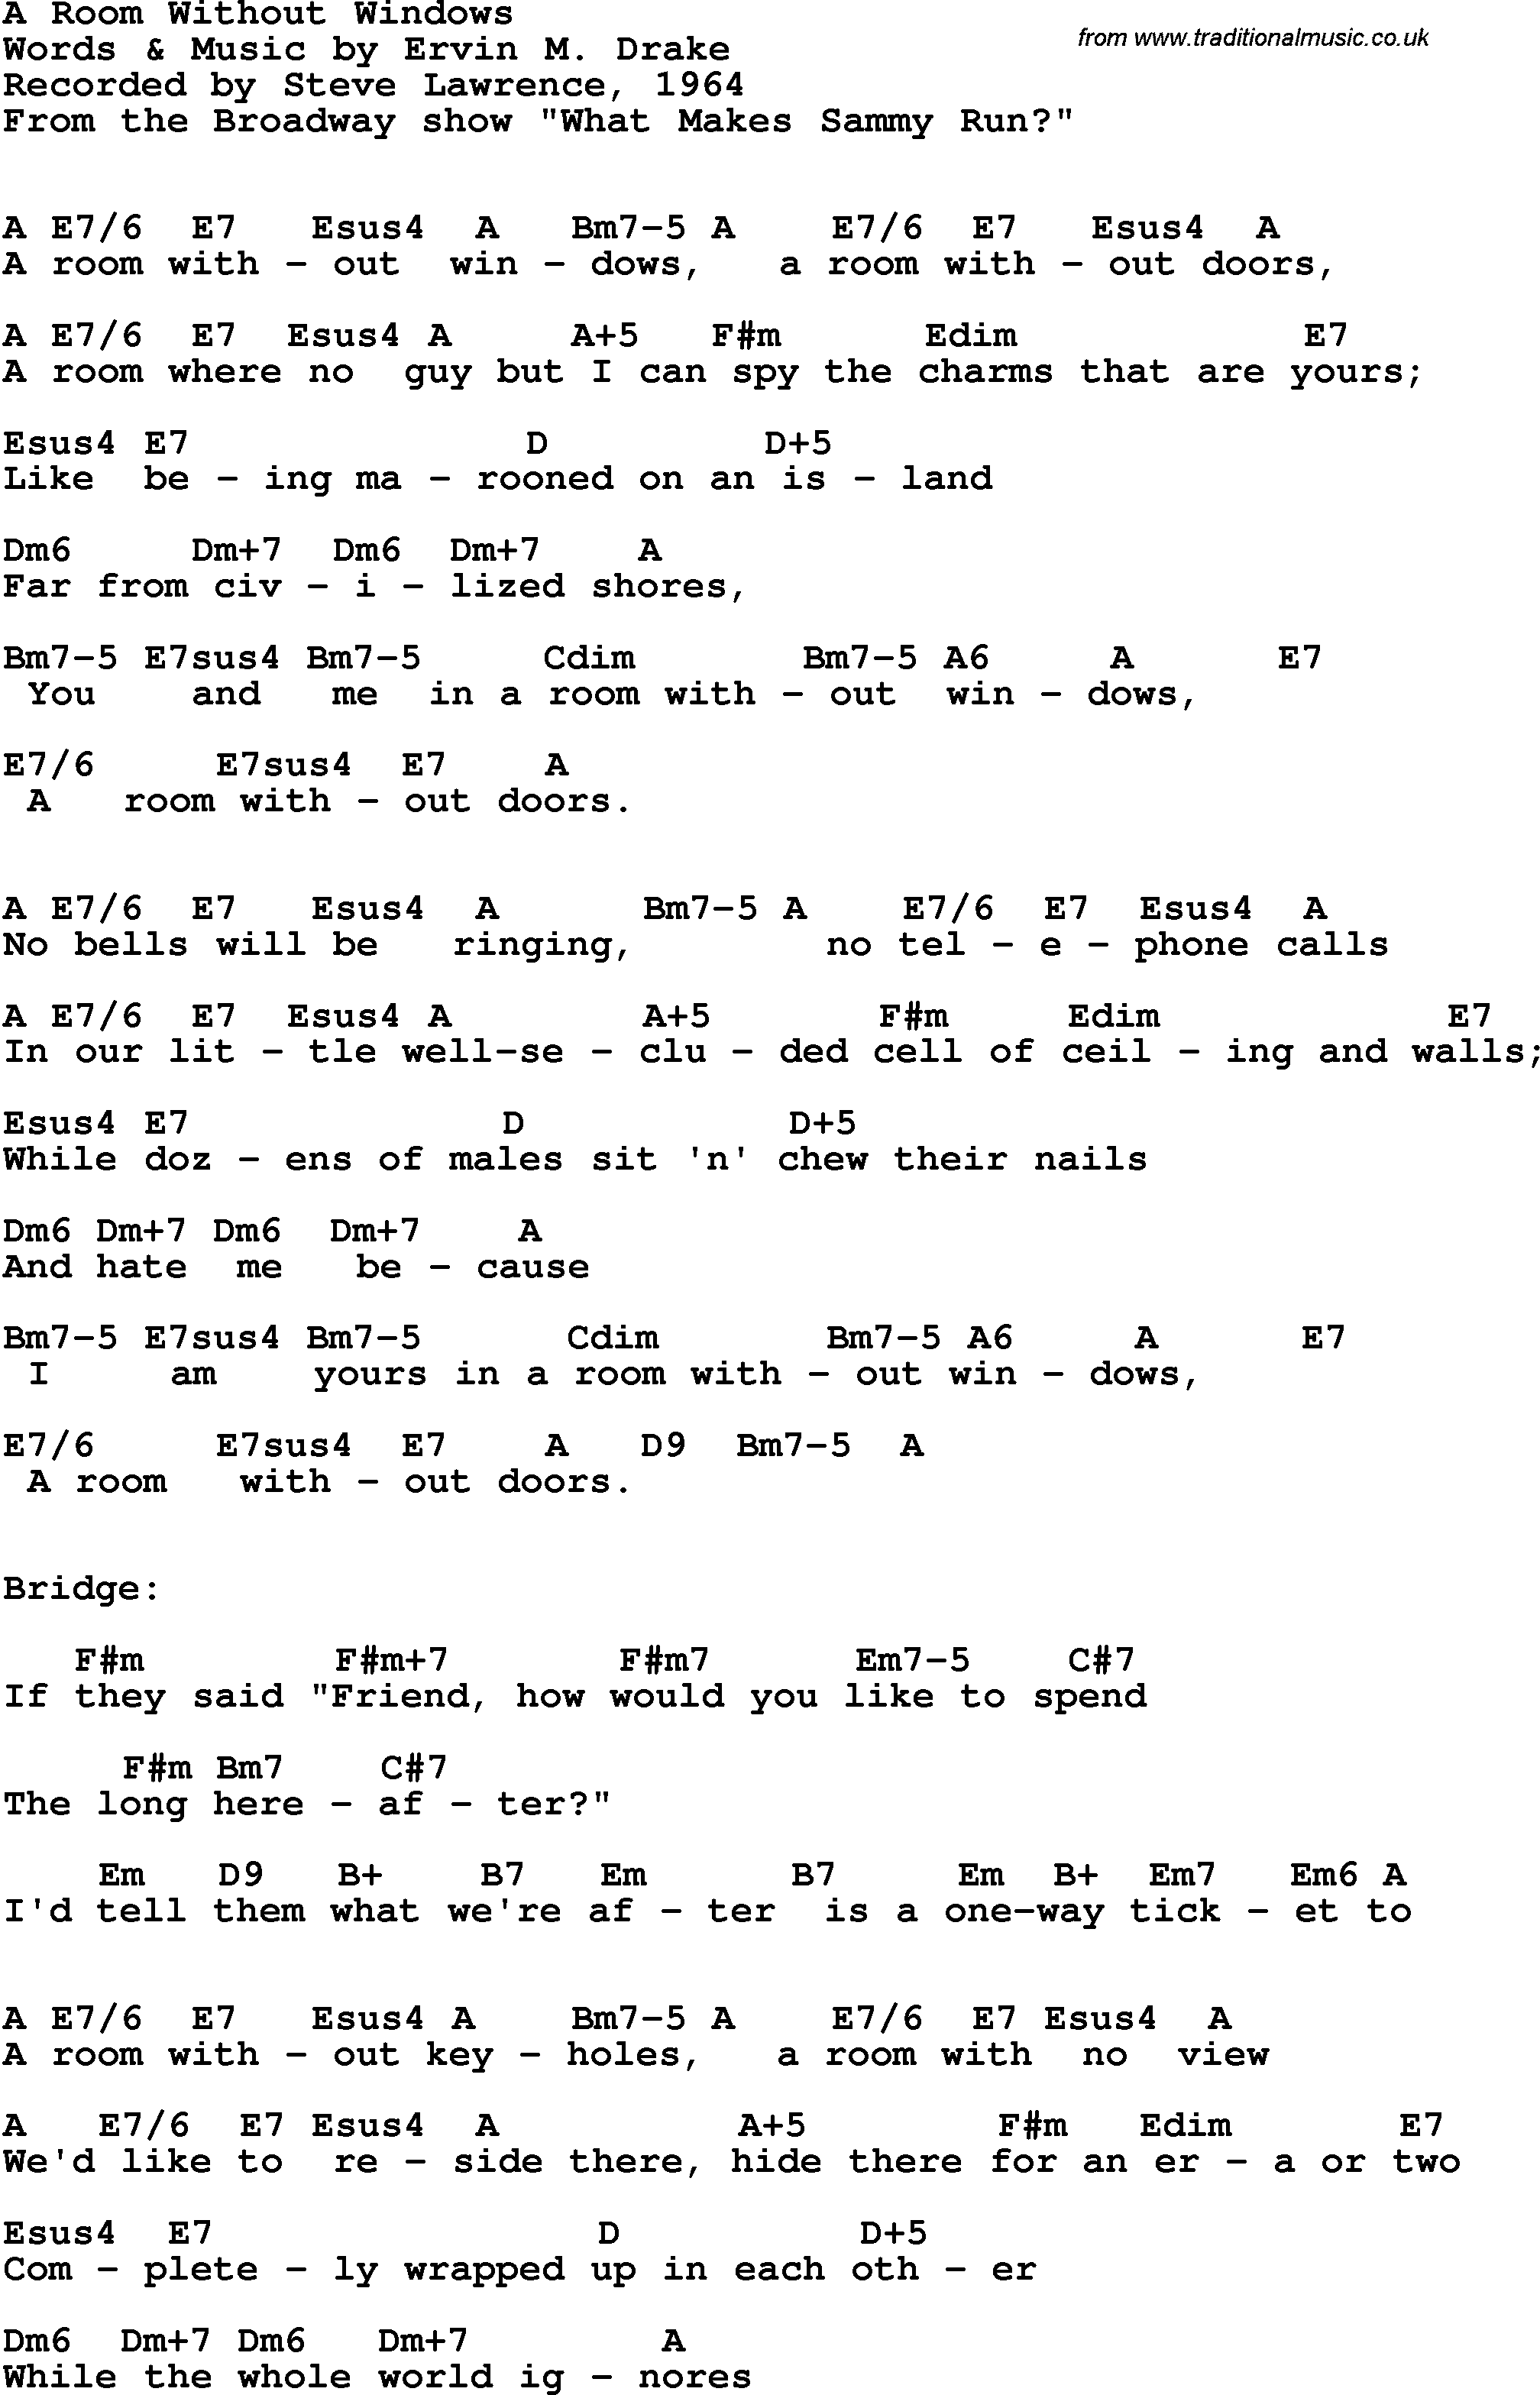 Song Lyrics with guitar chords for Room Without Windows, A - Steve Lawrence, 1964